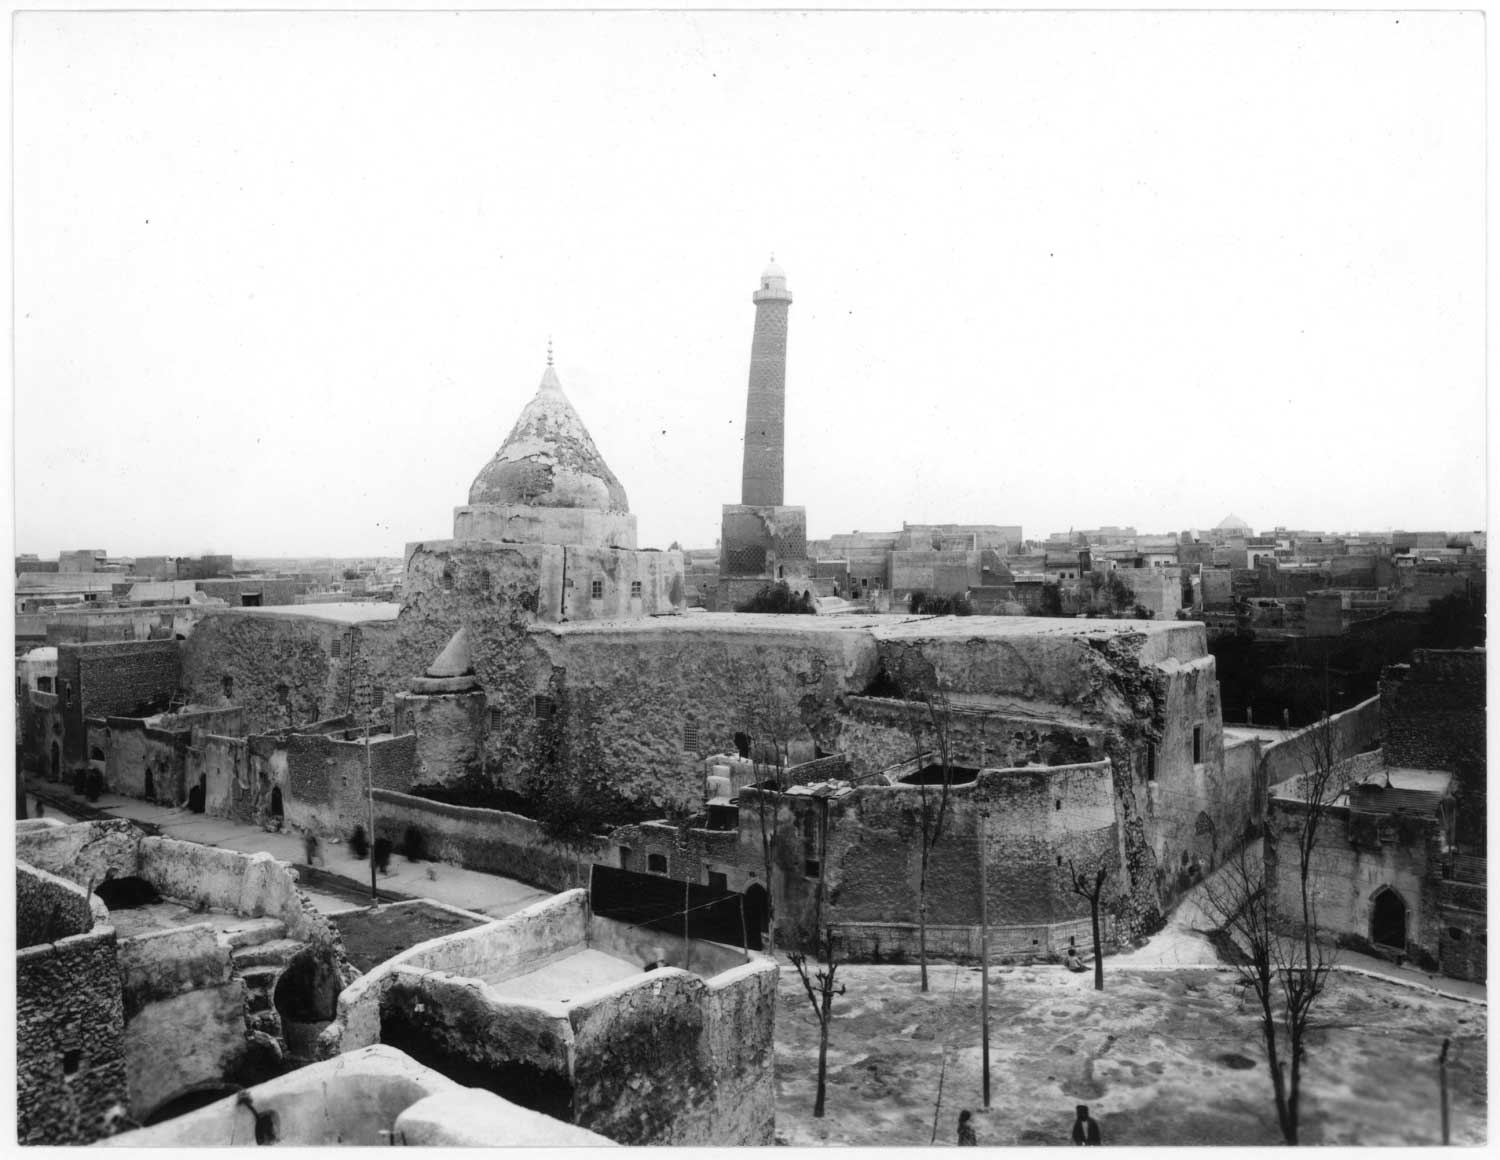 A view of the mosque complex from the southeast, prior to reconstruction in the 1940s.